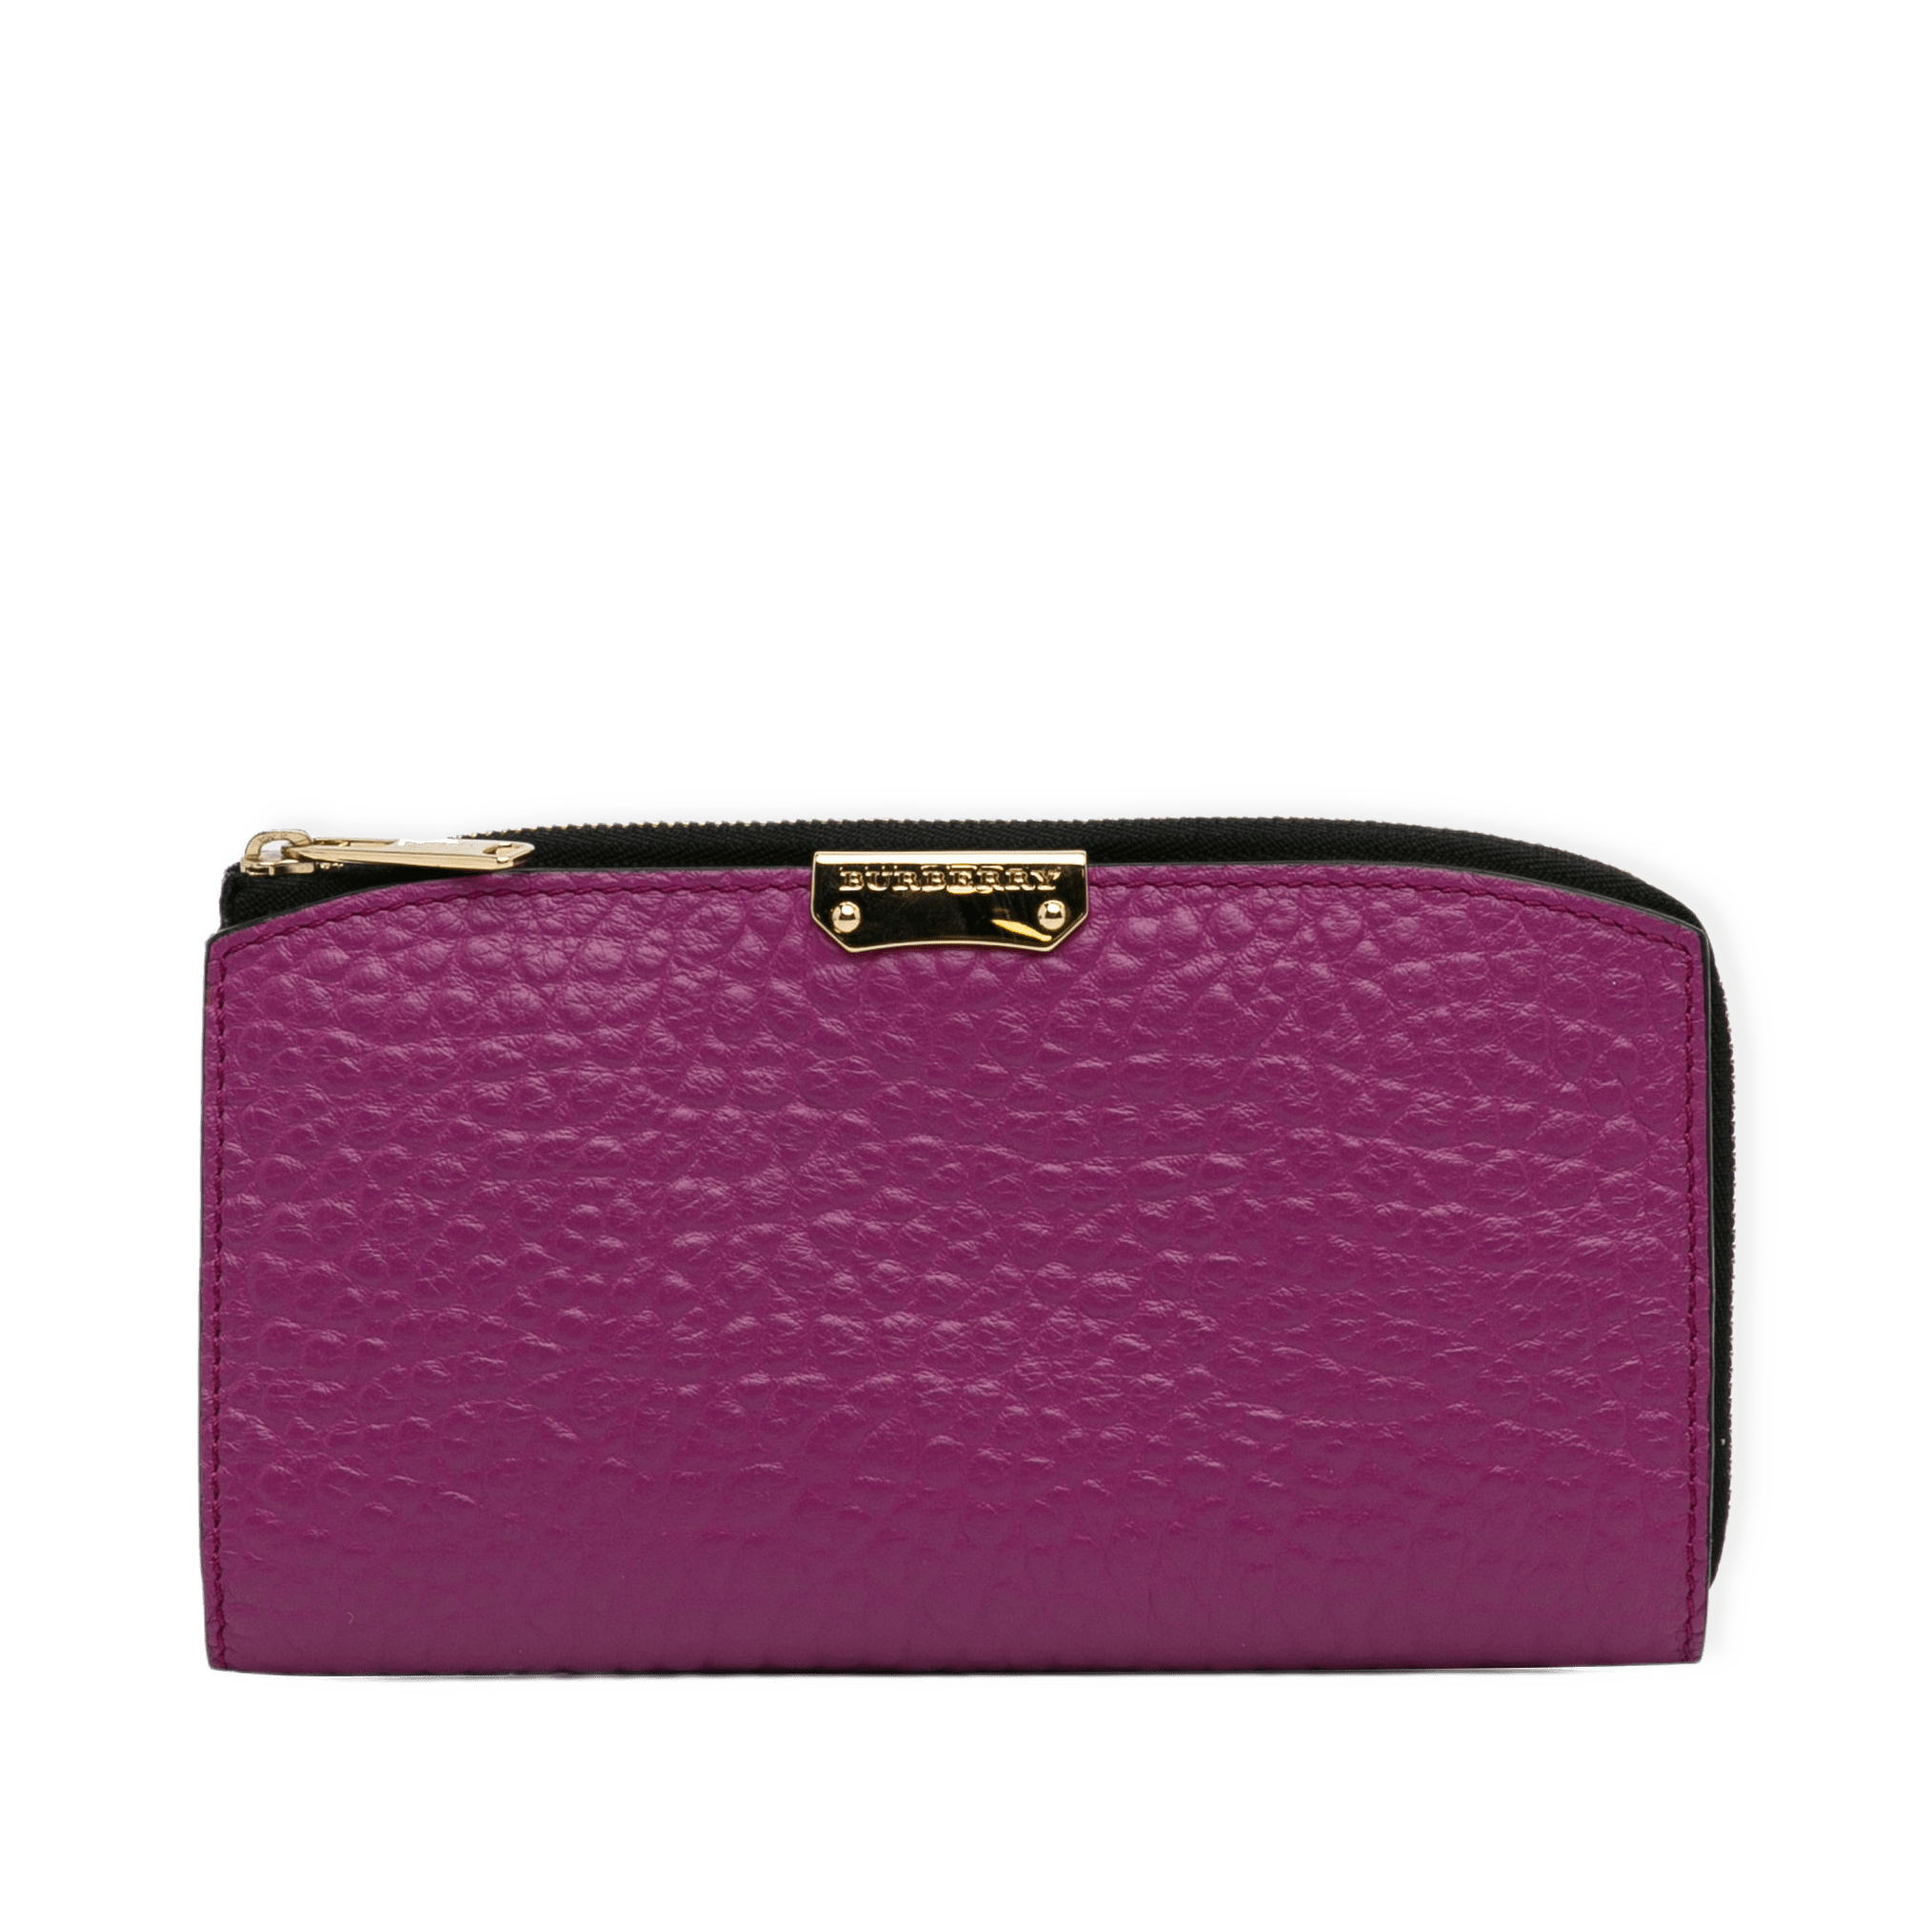 Burberry Madison Leather Long Wallet från Luxclusif